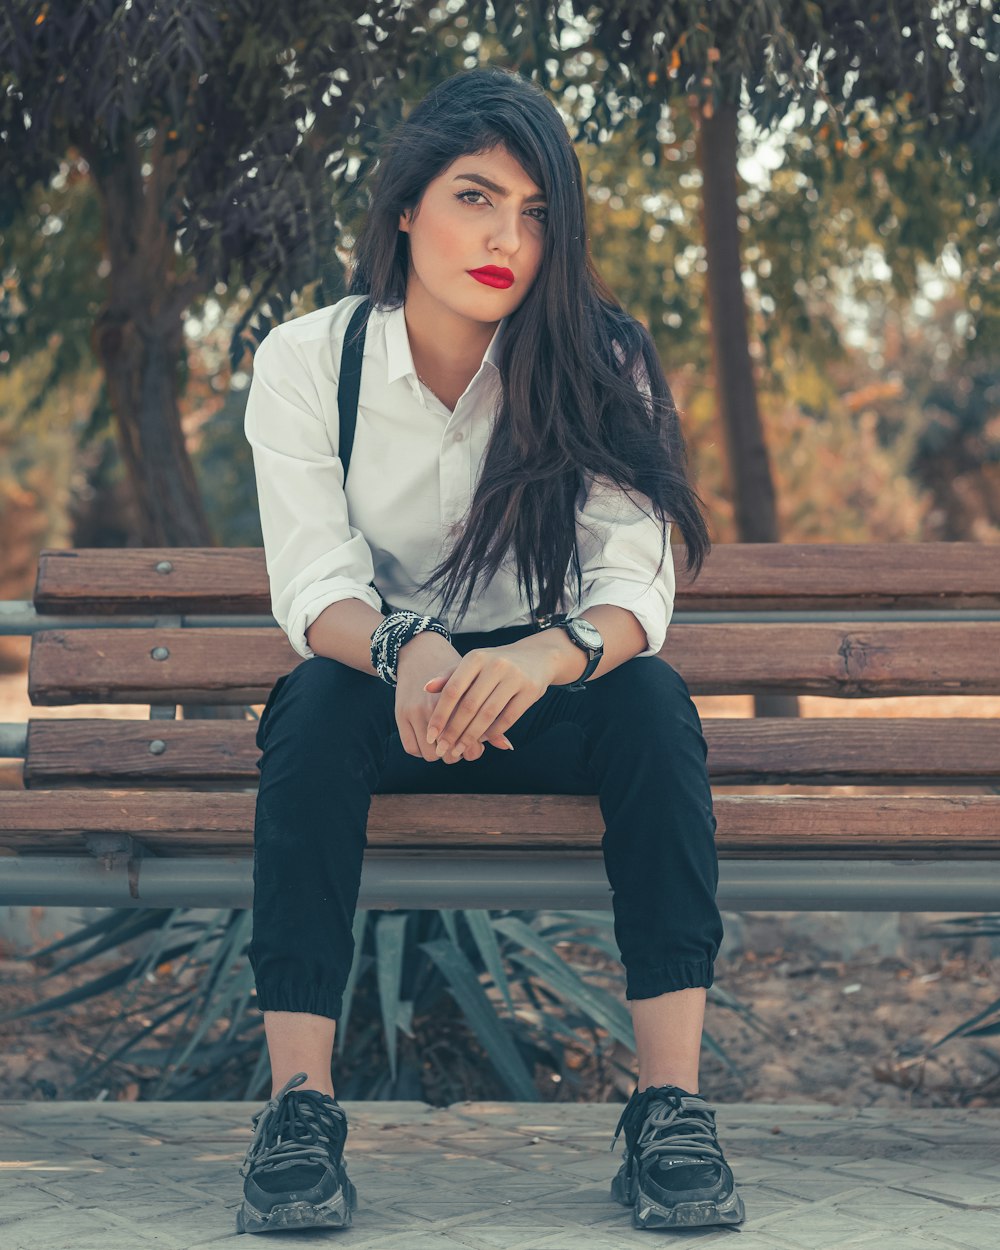 woman in white jacket sitting on brown wooden bench